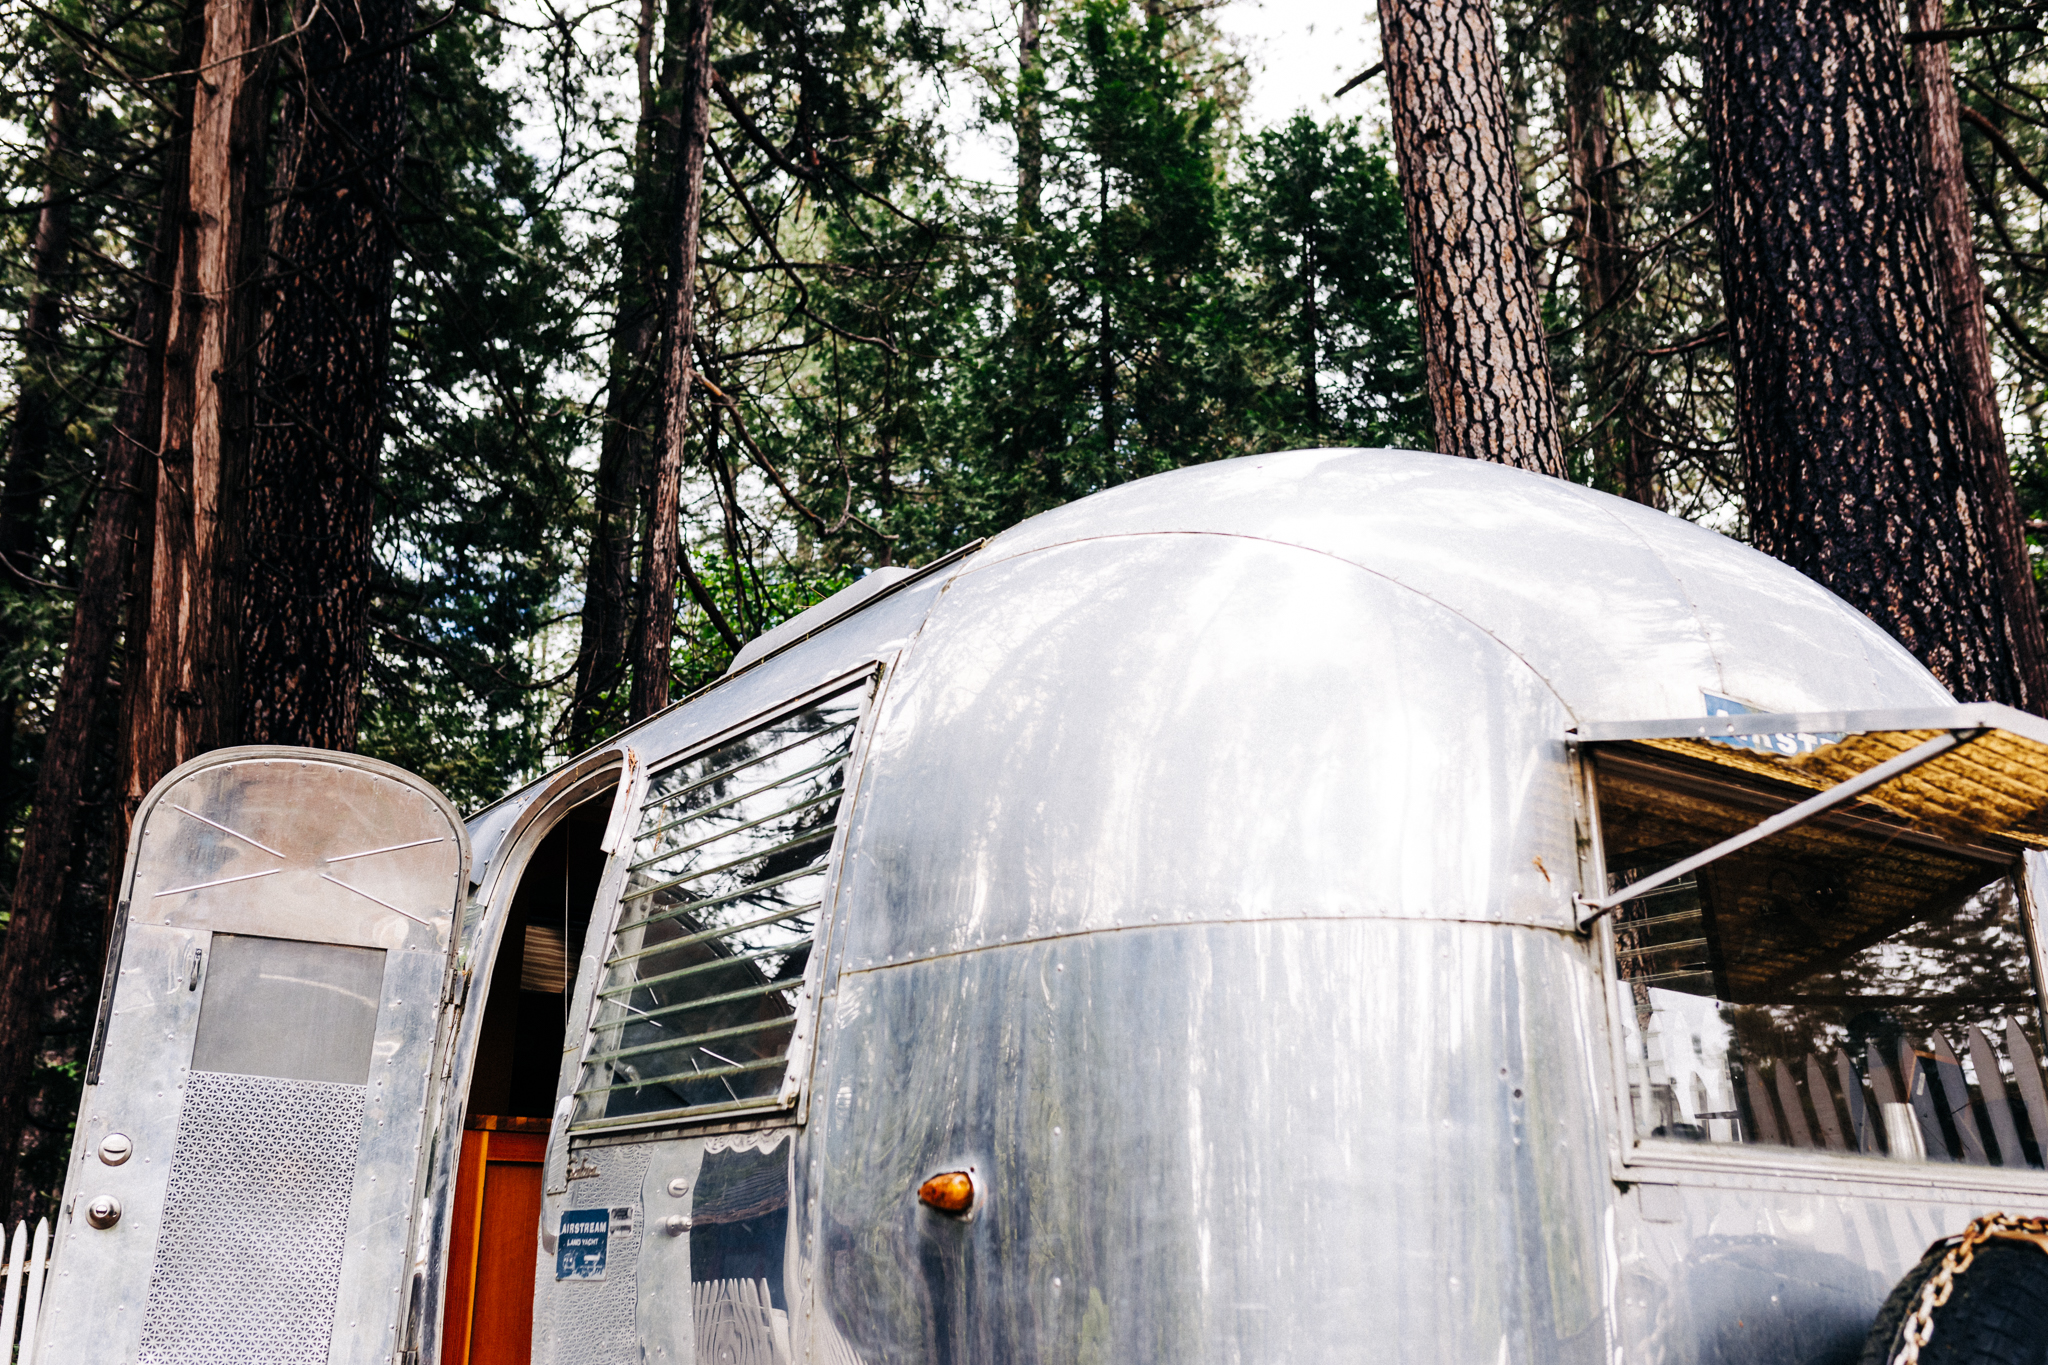 PhotoWalk at the Inn Town Campground with Nevada City Scenics | 